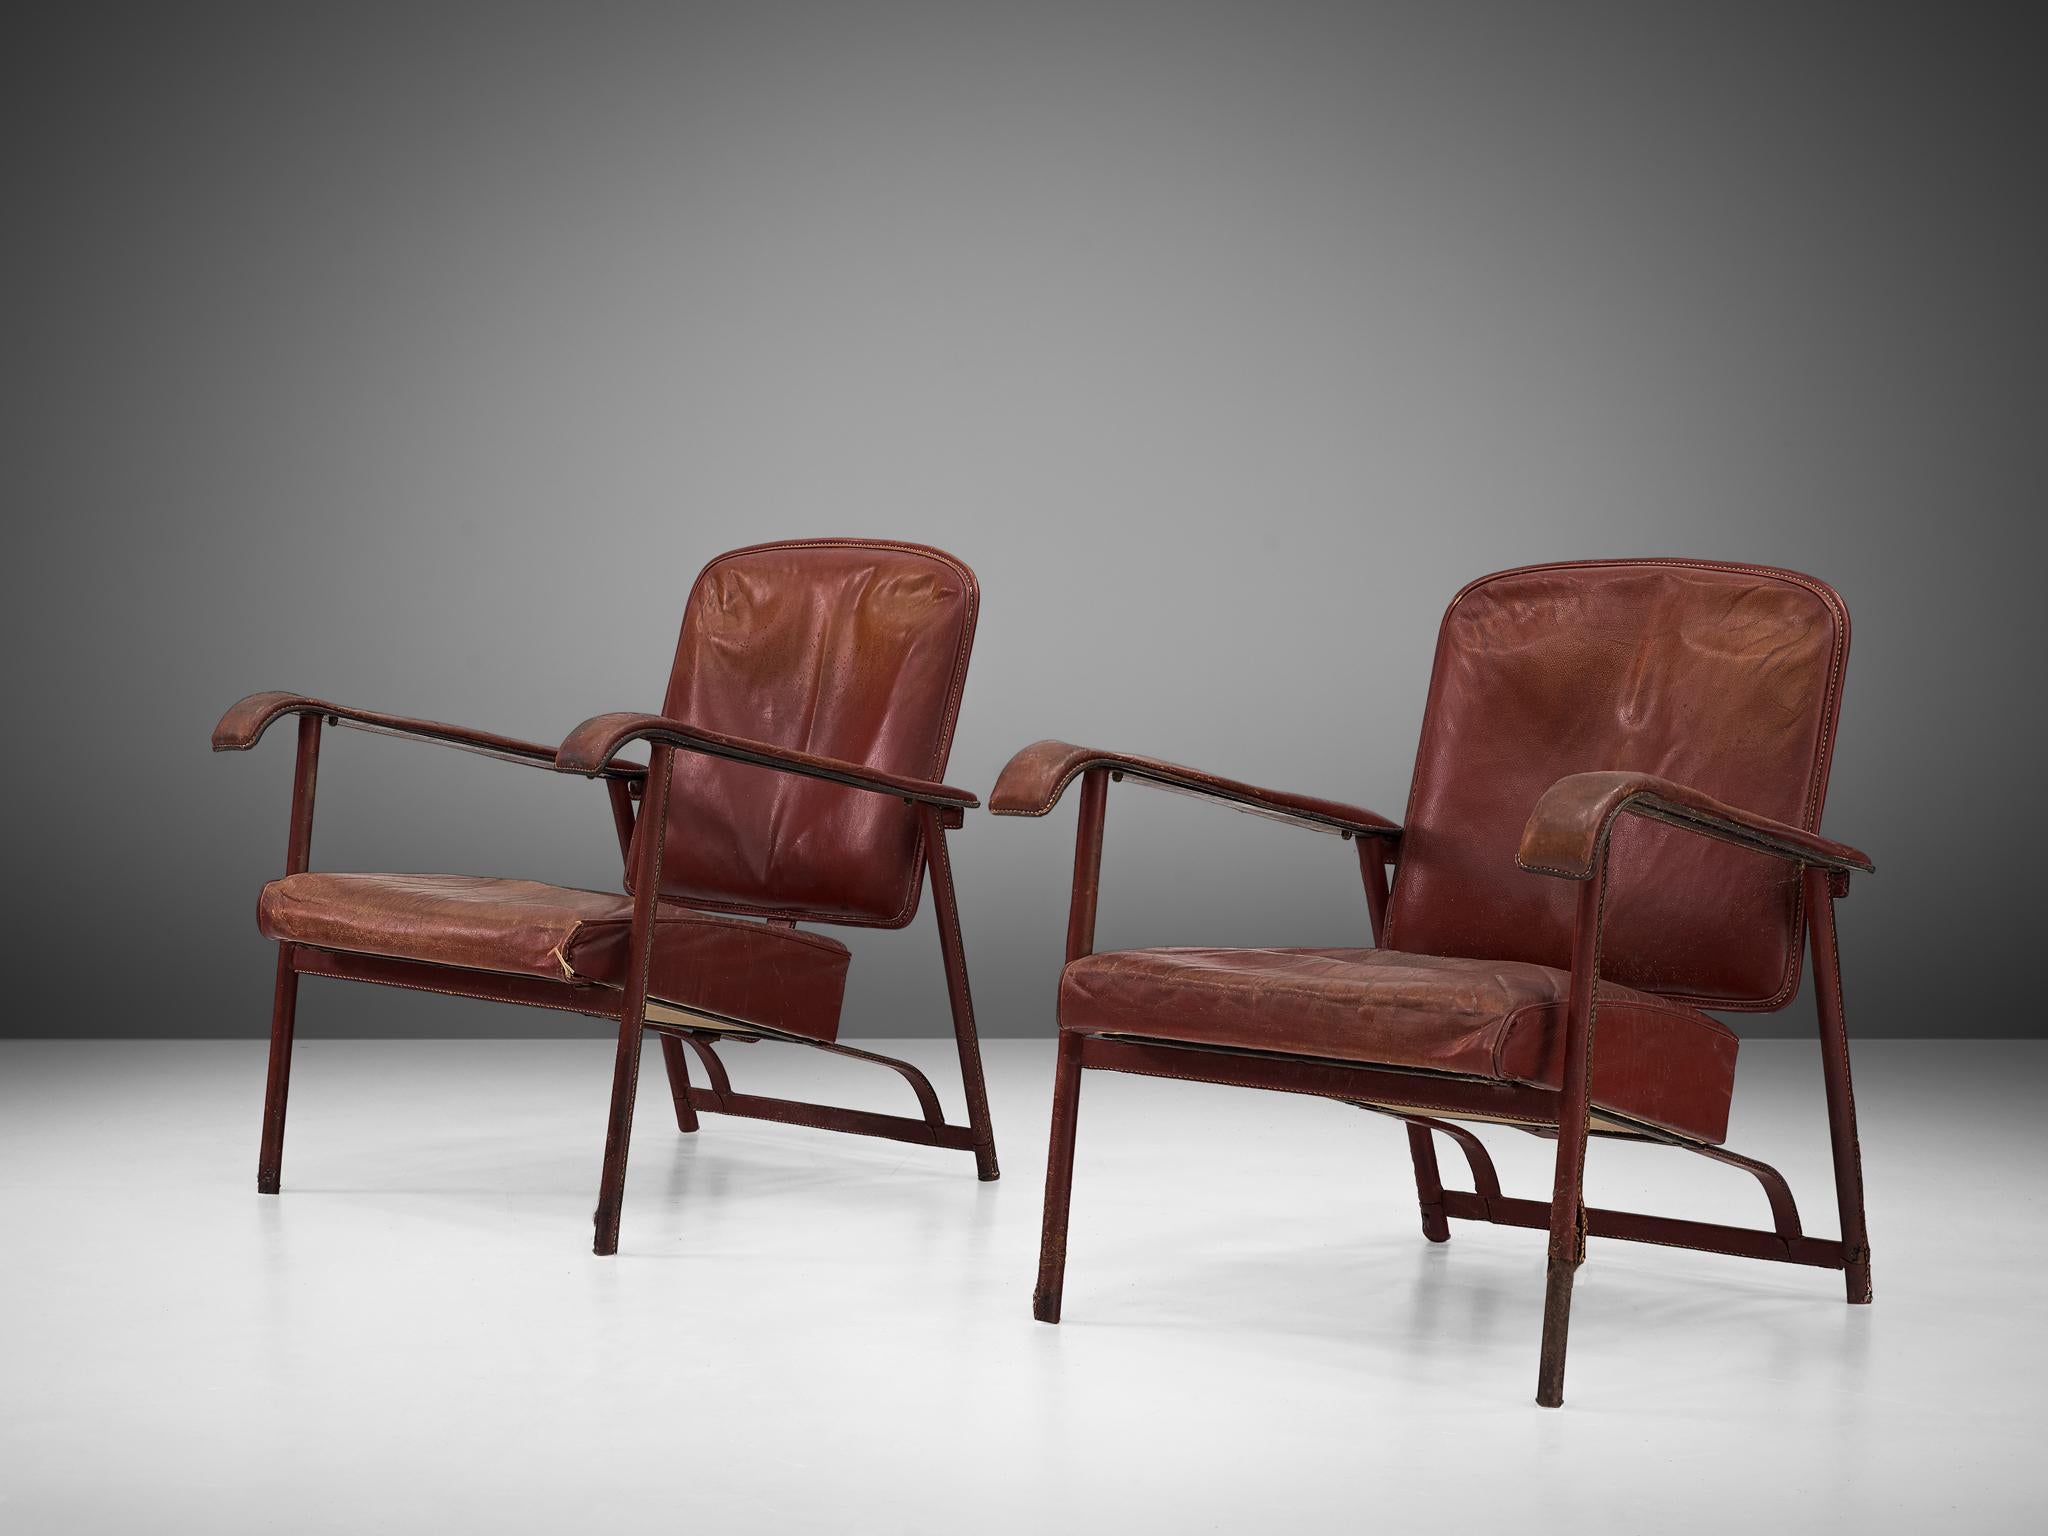 Metal Jacques Adnet Pair of Lounge Chairs in Patinated Burgundy Leather